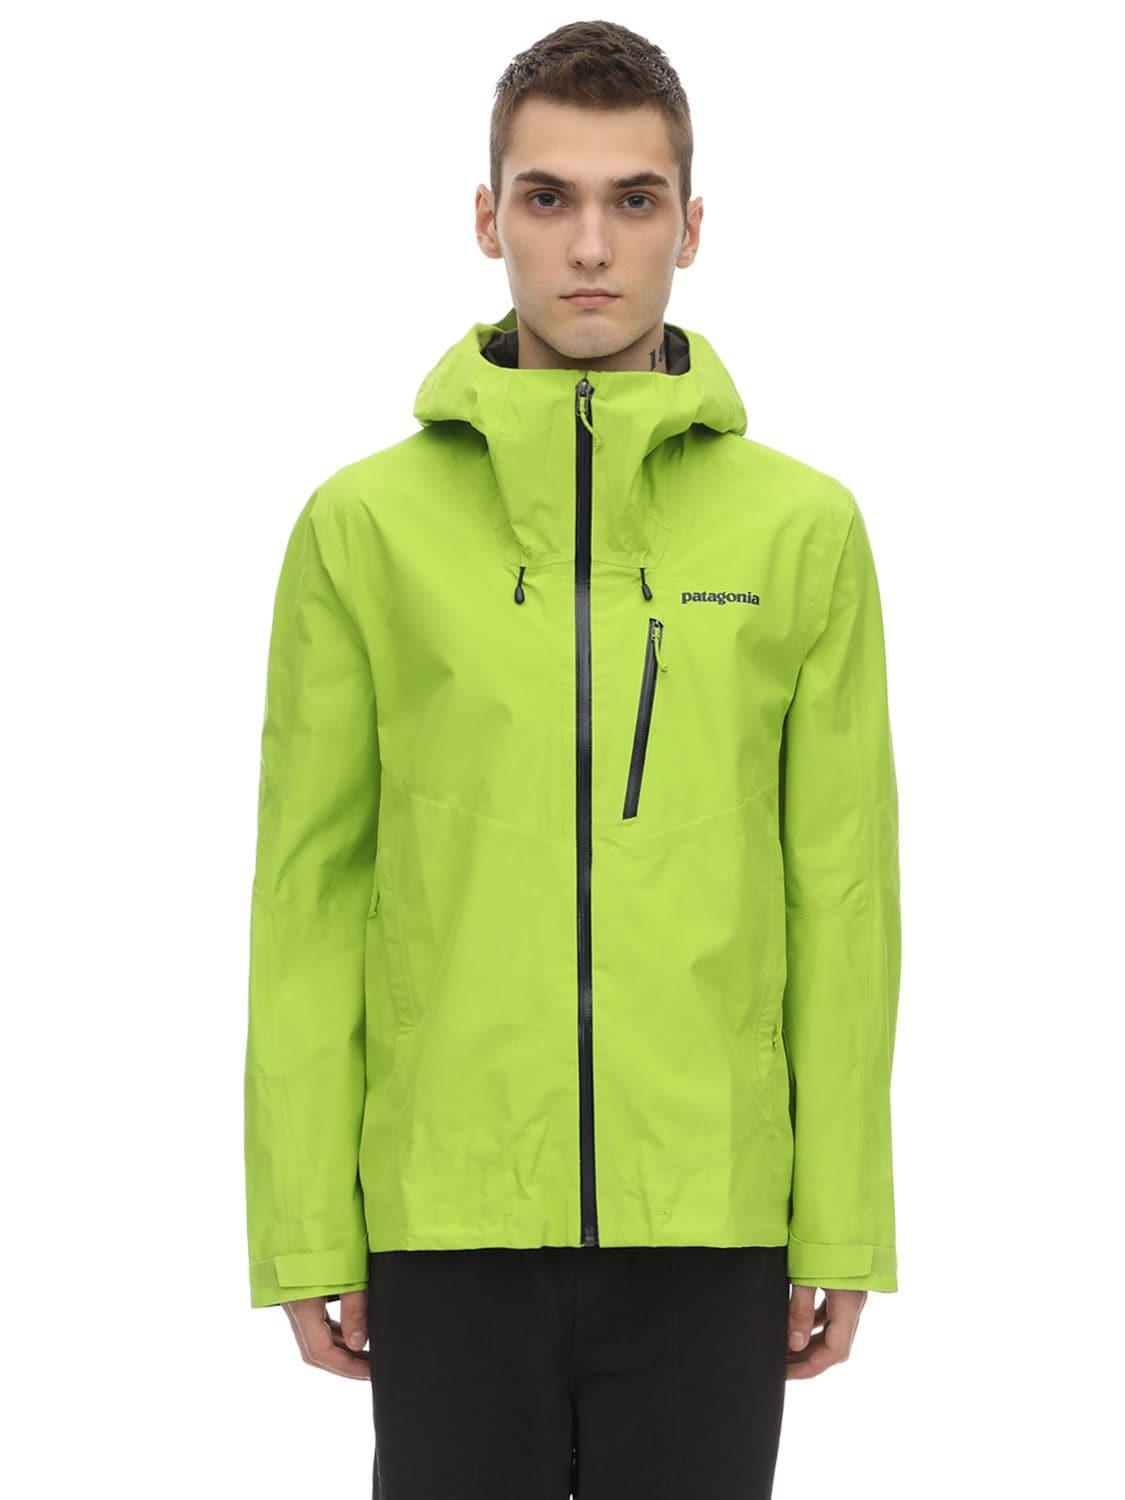 Patagonia Synthetic Calcite Jacket in Green for Men - Lyst